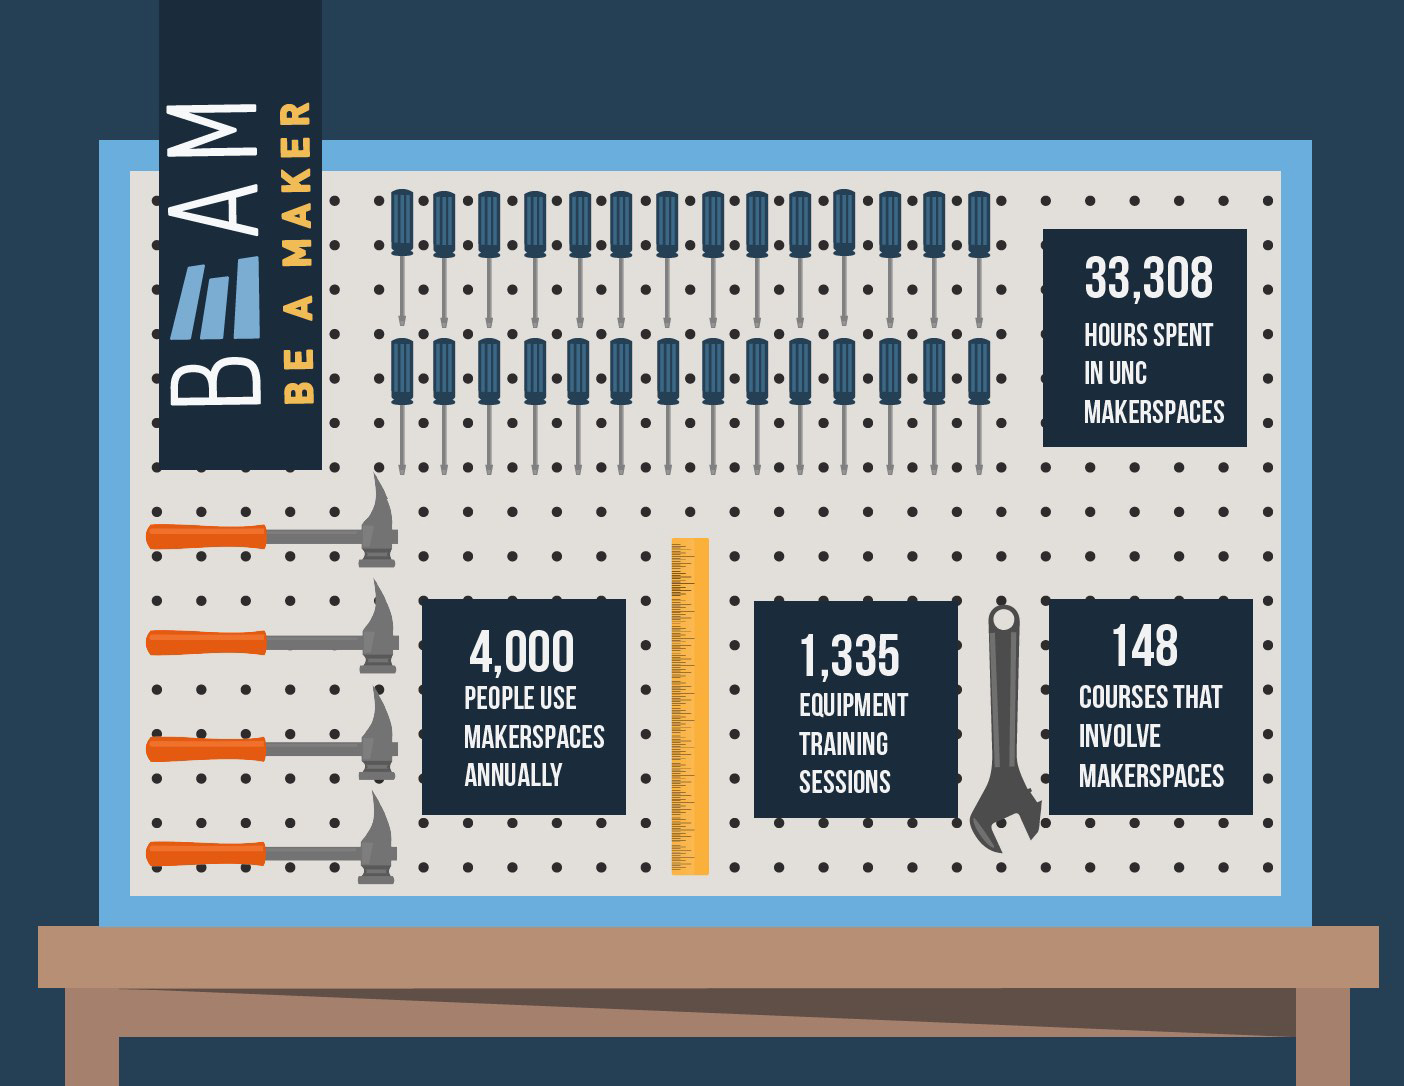 A graphic shows the number of BeAM projects undertaken: 33,308 hours spent in UNC makerspaces; 4,000 people use makerspaces annually; 1,335 equipment training sessions and 148 courses that involve makerspaces.